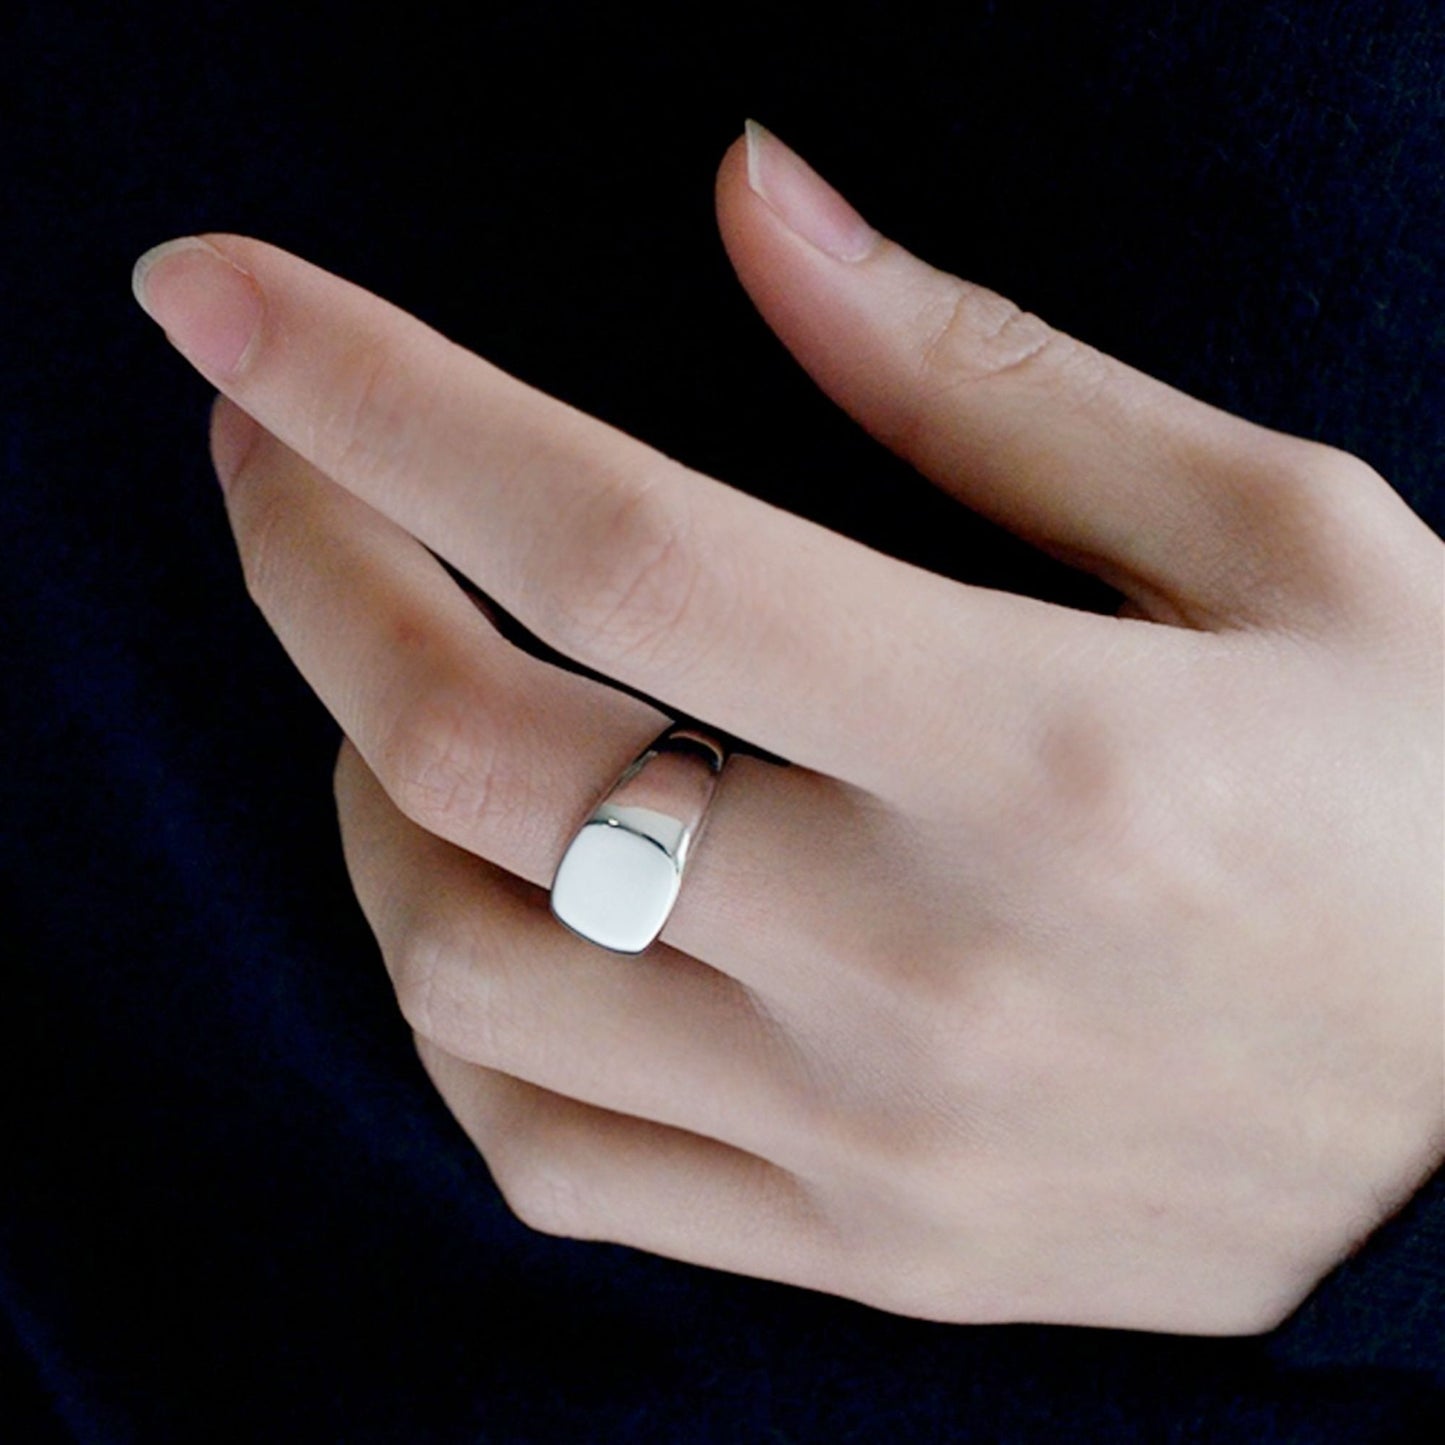 Sterling Silver Unisex Cushion Square Signet Ring Boxed N Shiny Polished - sugarkittenlondon